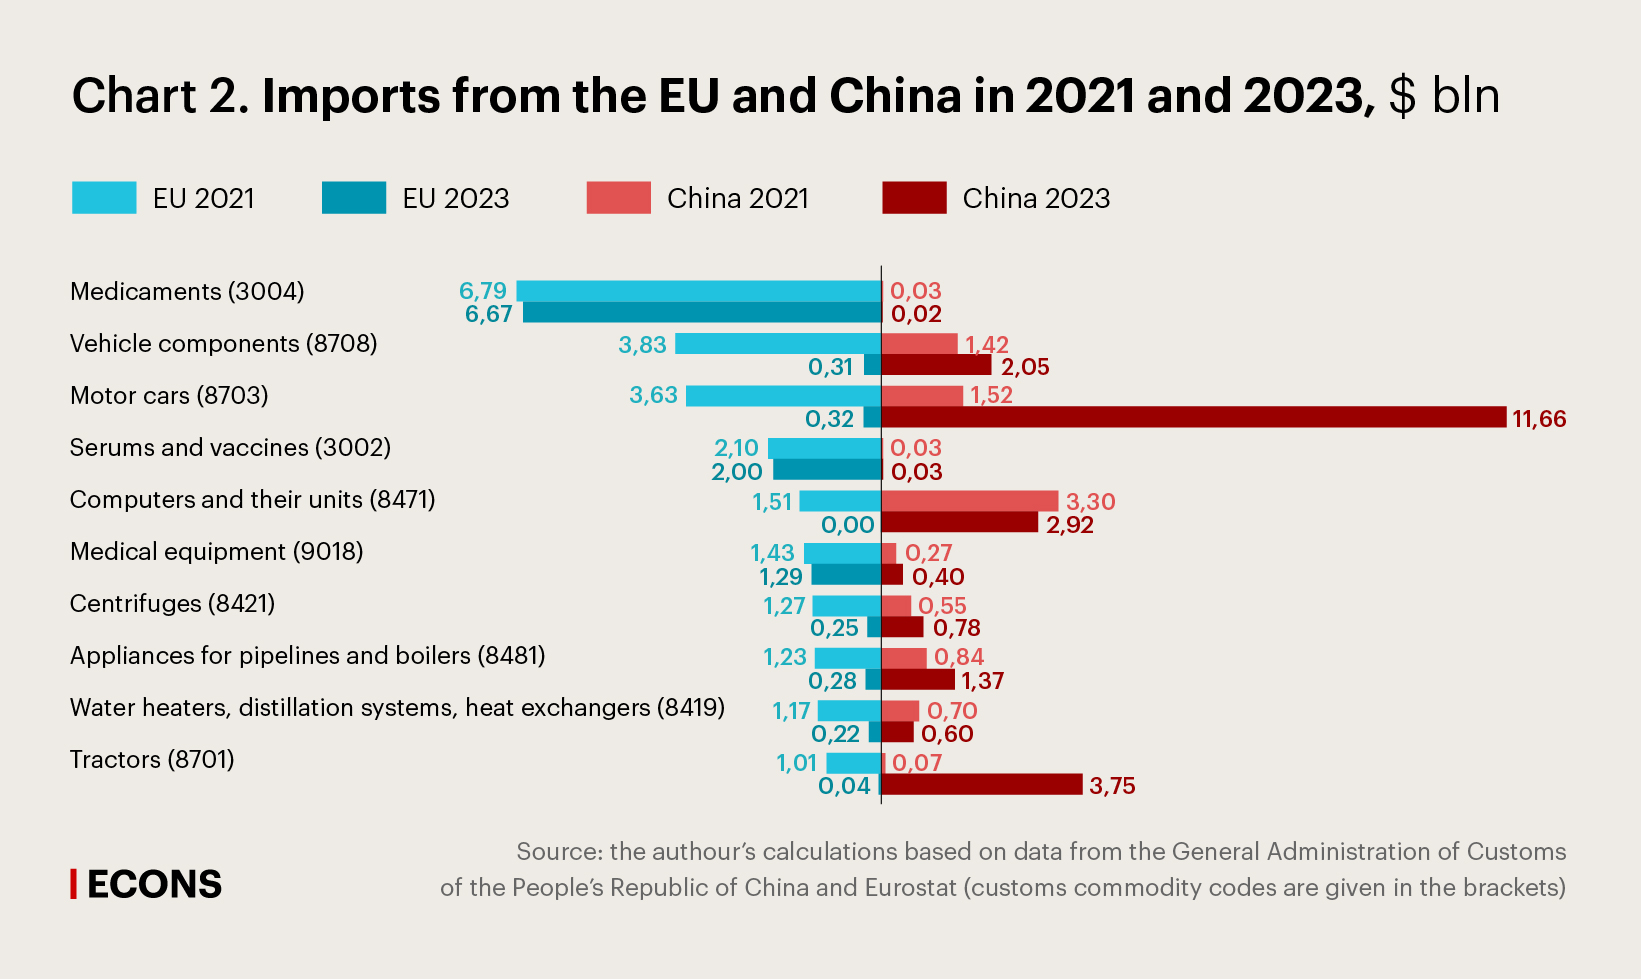 Imports from the EU and China in 2021 and 2023, $ bln